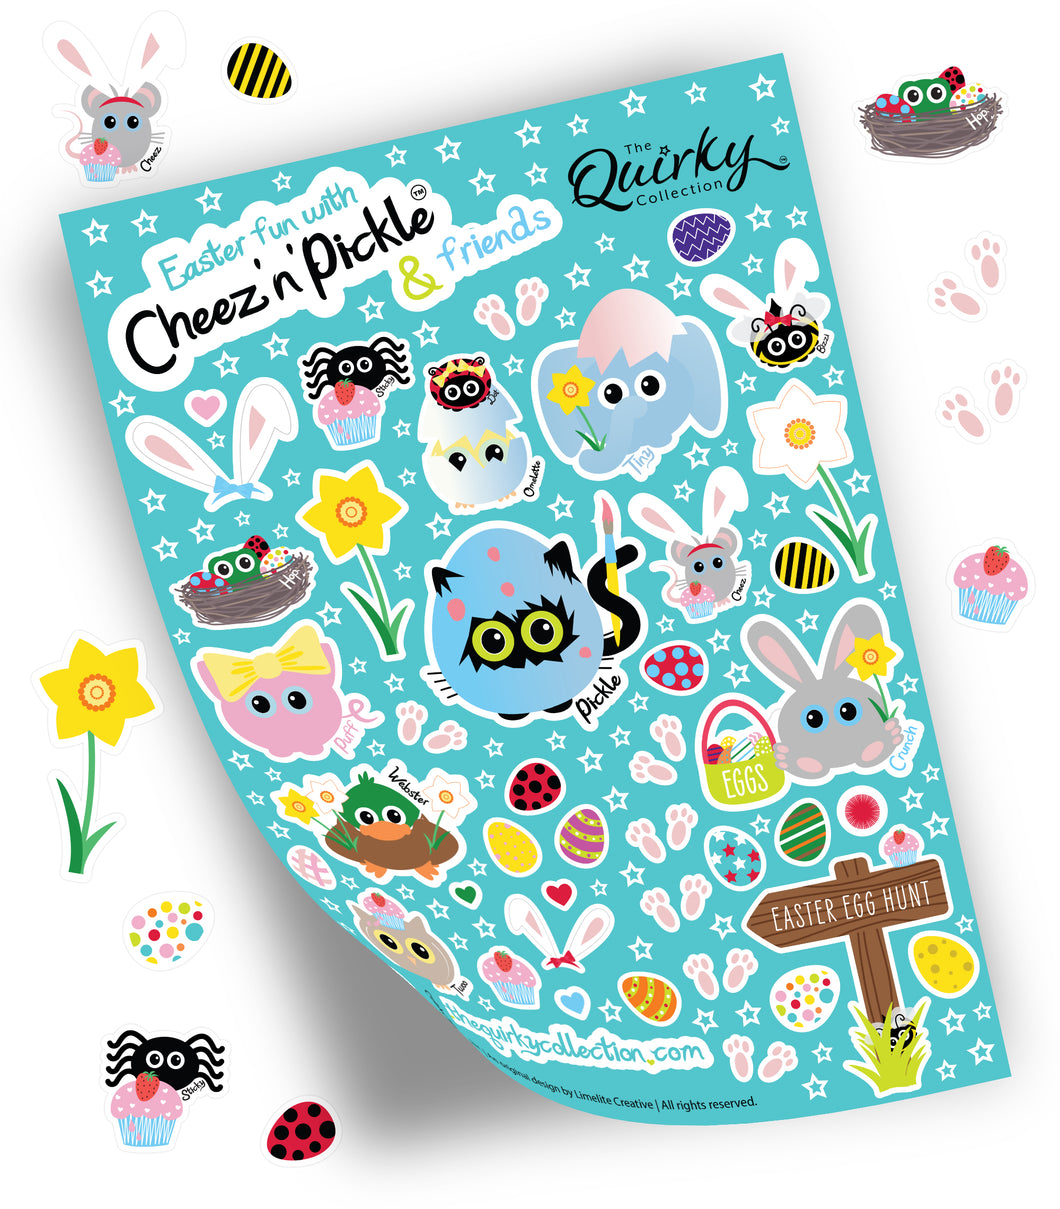 Easter fun with Cheez 'n' Pickle & friends A5 peelable animal sticker sheet with 41 stickers